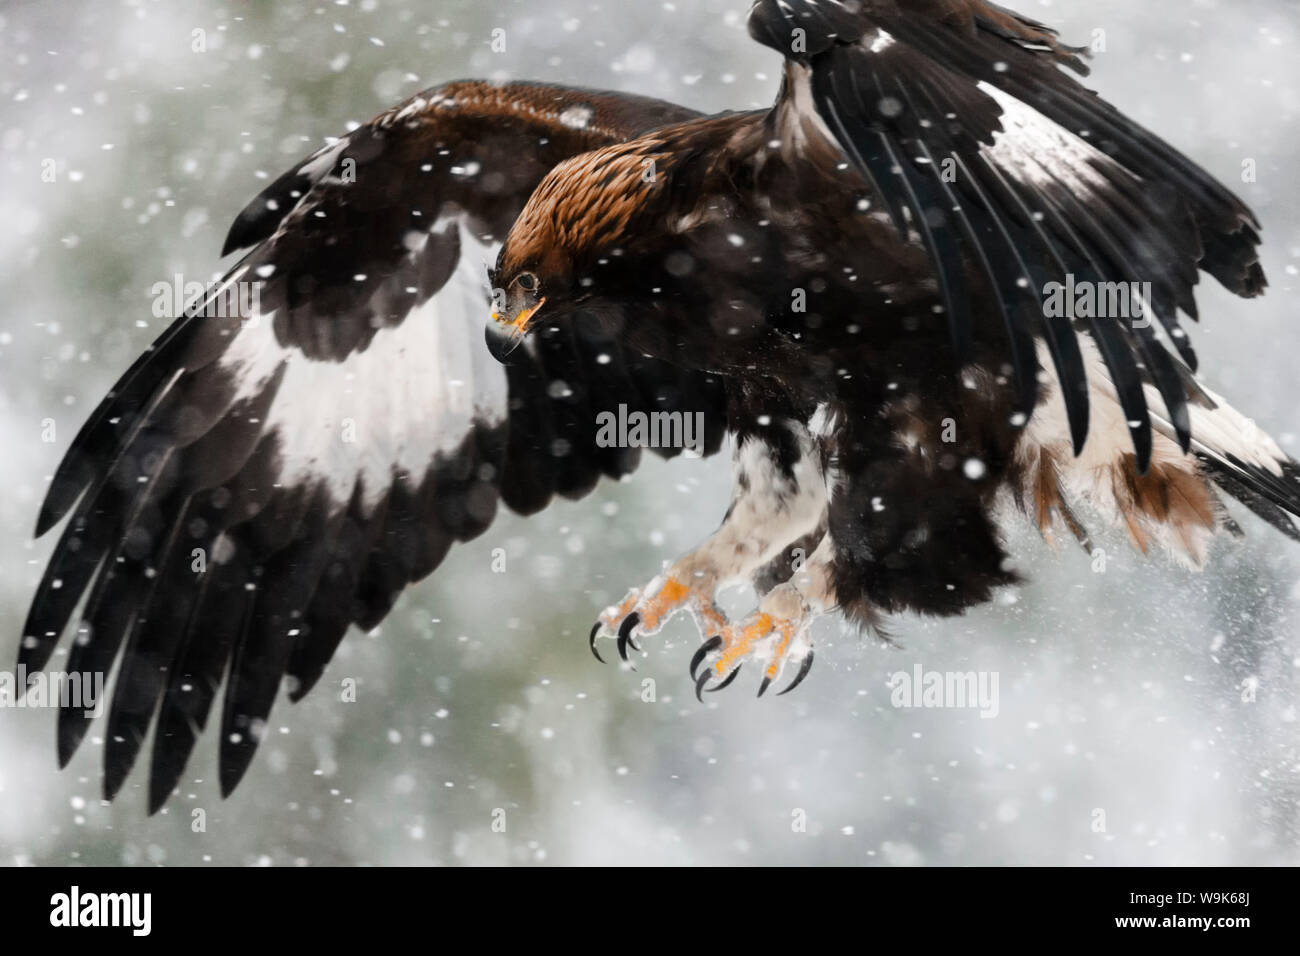 Juvenile golden eagle (Aquila chrysaetos) flying in the snow with claws out-stretched about to land on its prey, Taiga Forest, Lapland, Finland Stock Photo